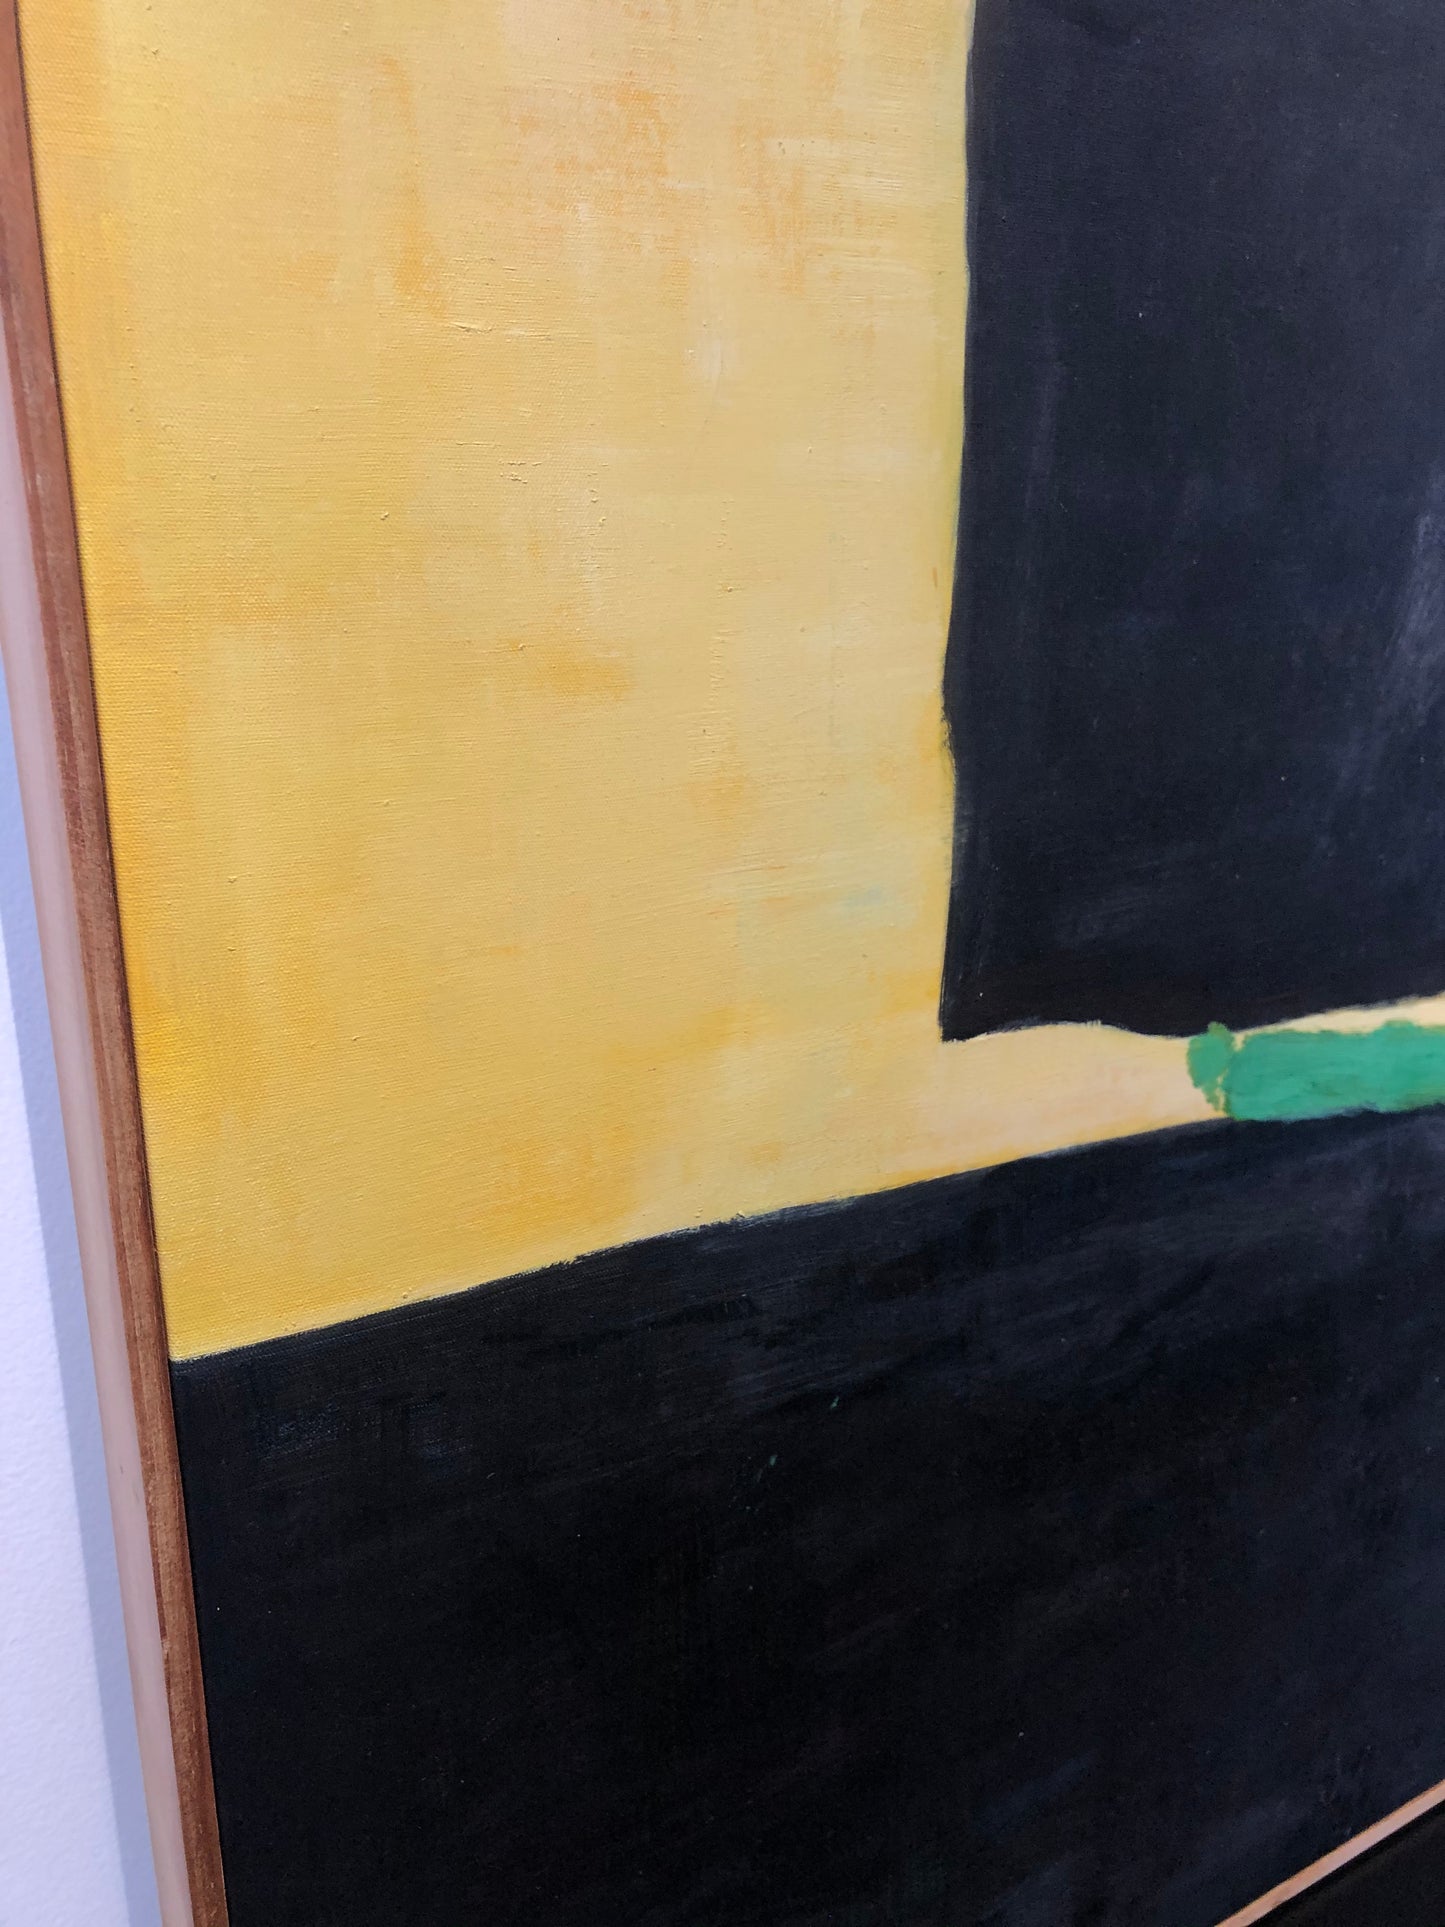 Reproduction of a Work by Robert Motherwell Oil on Canvas